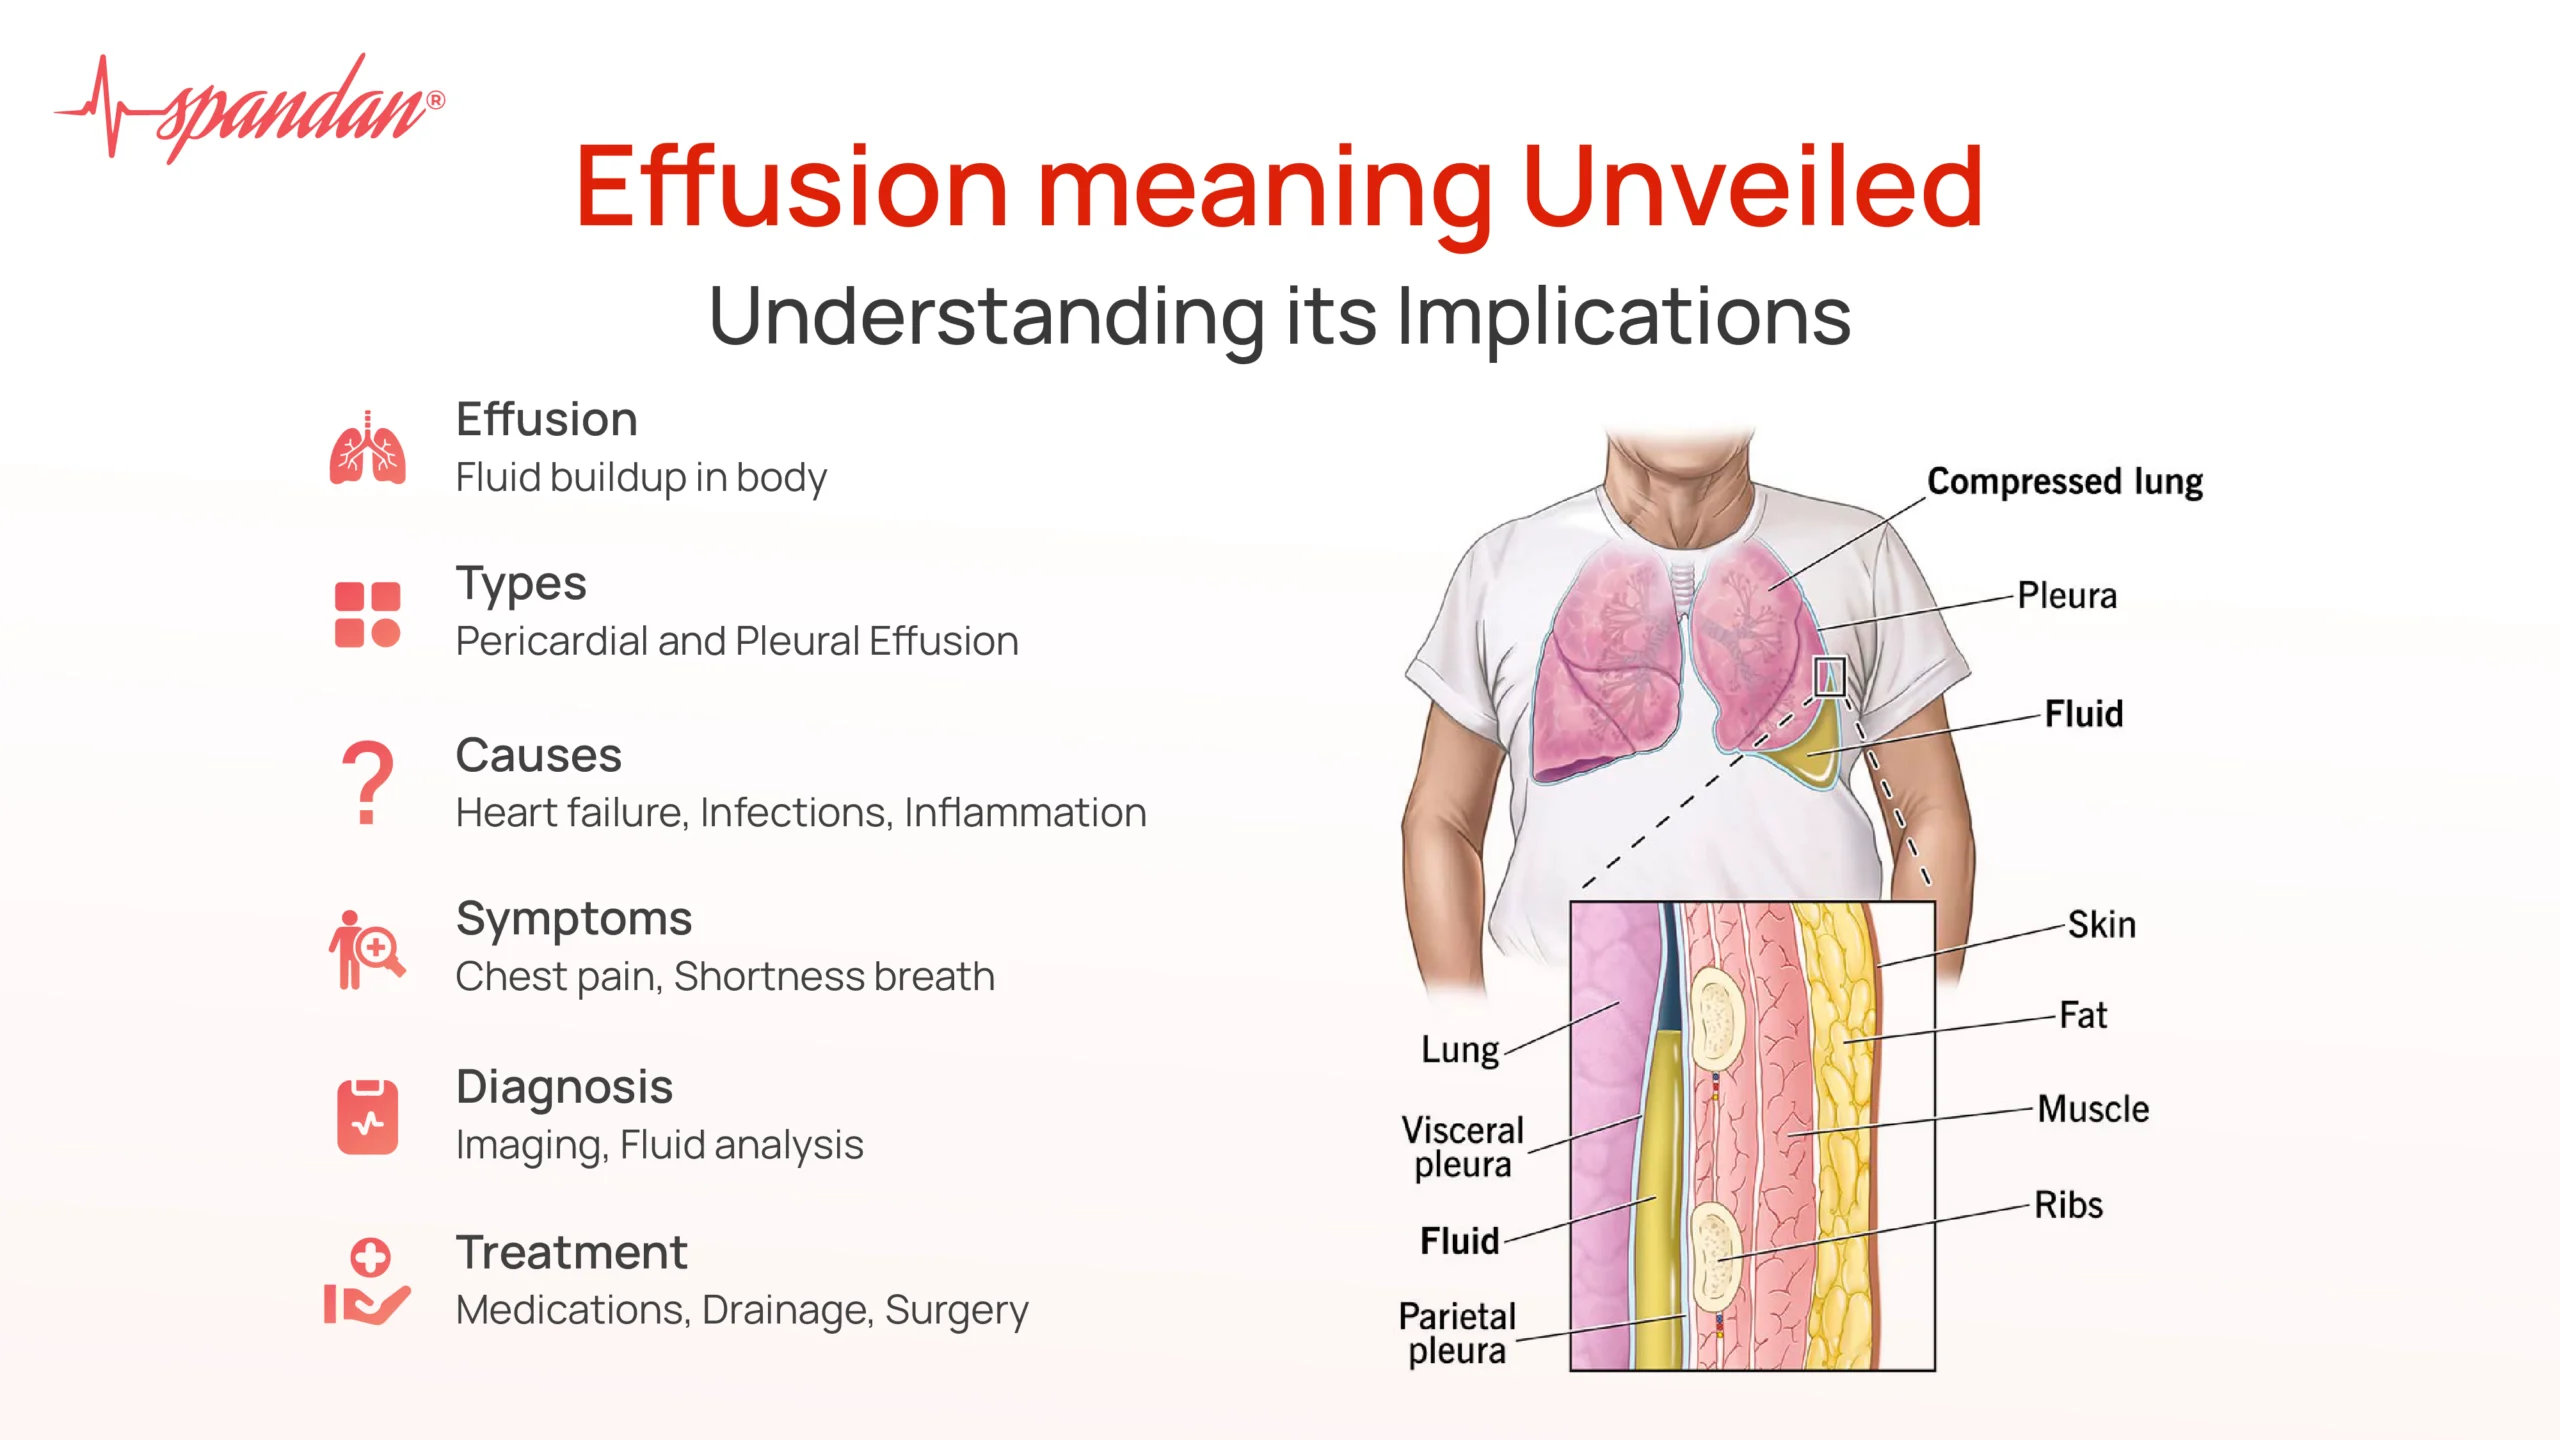 Effusion meaning